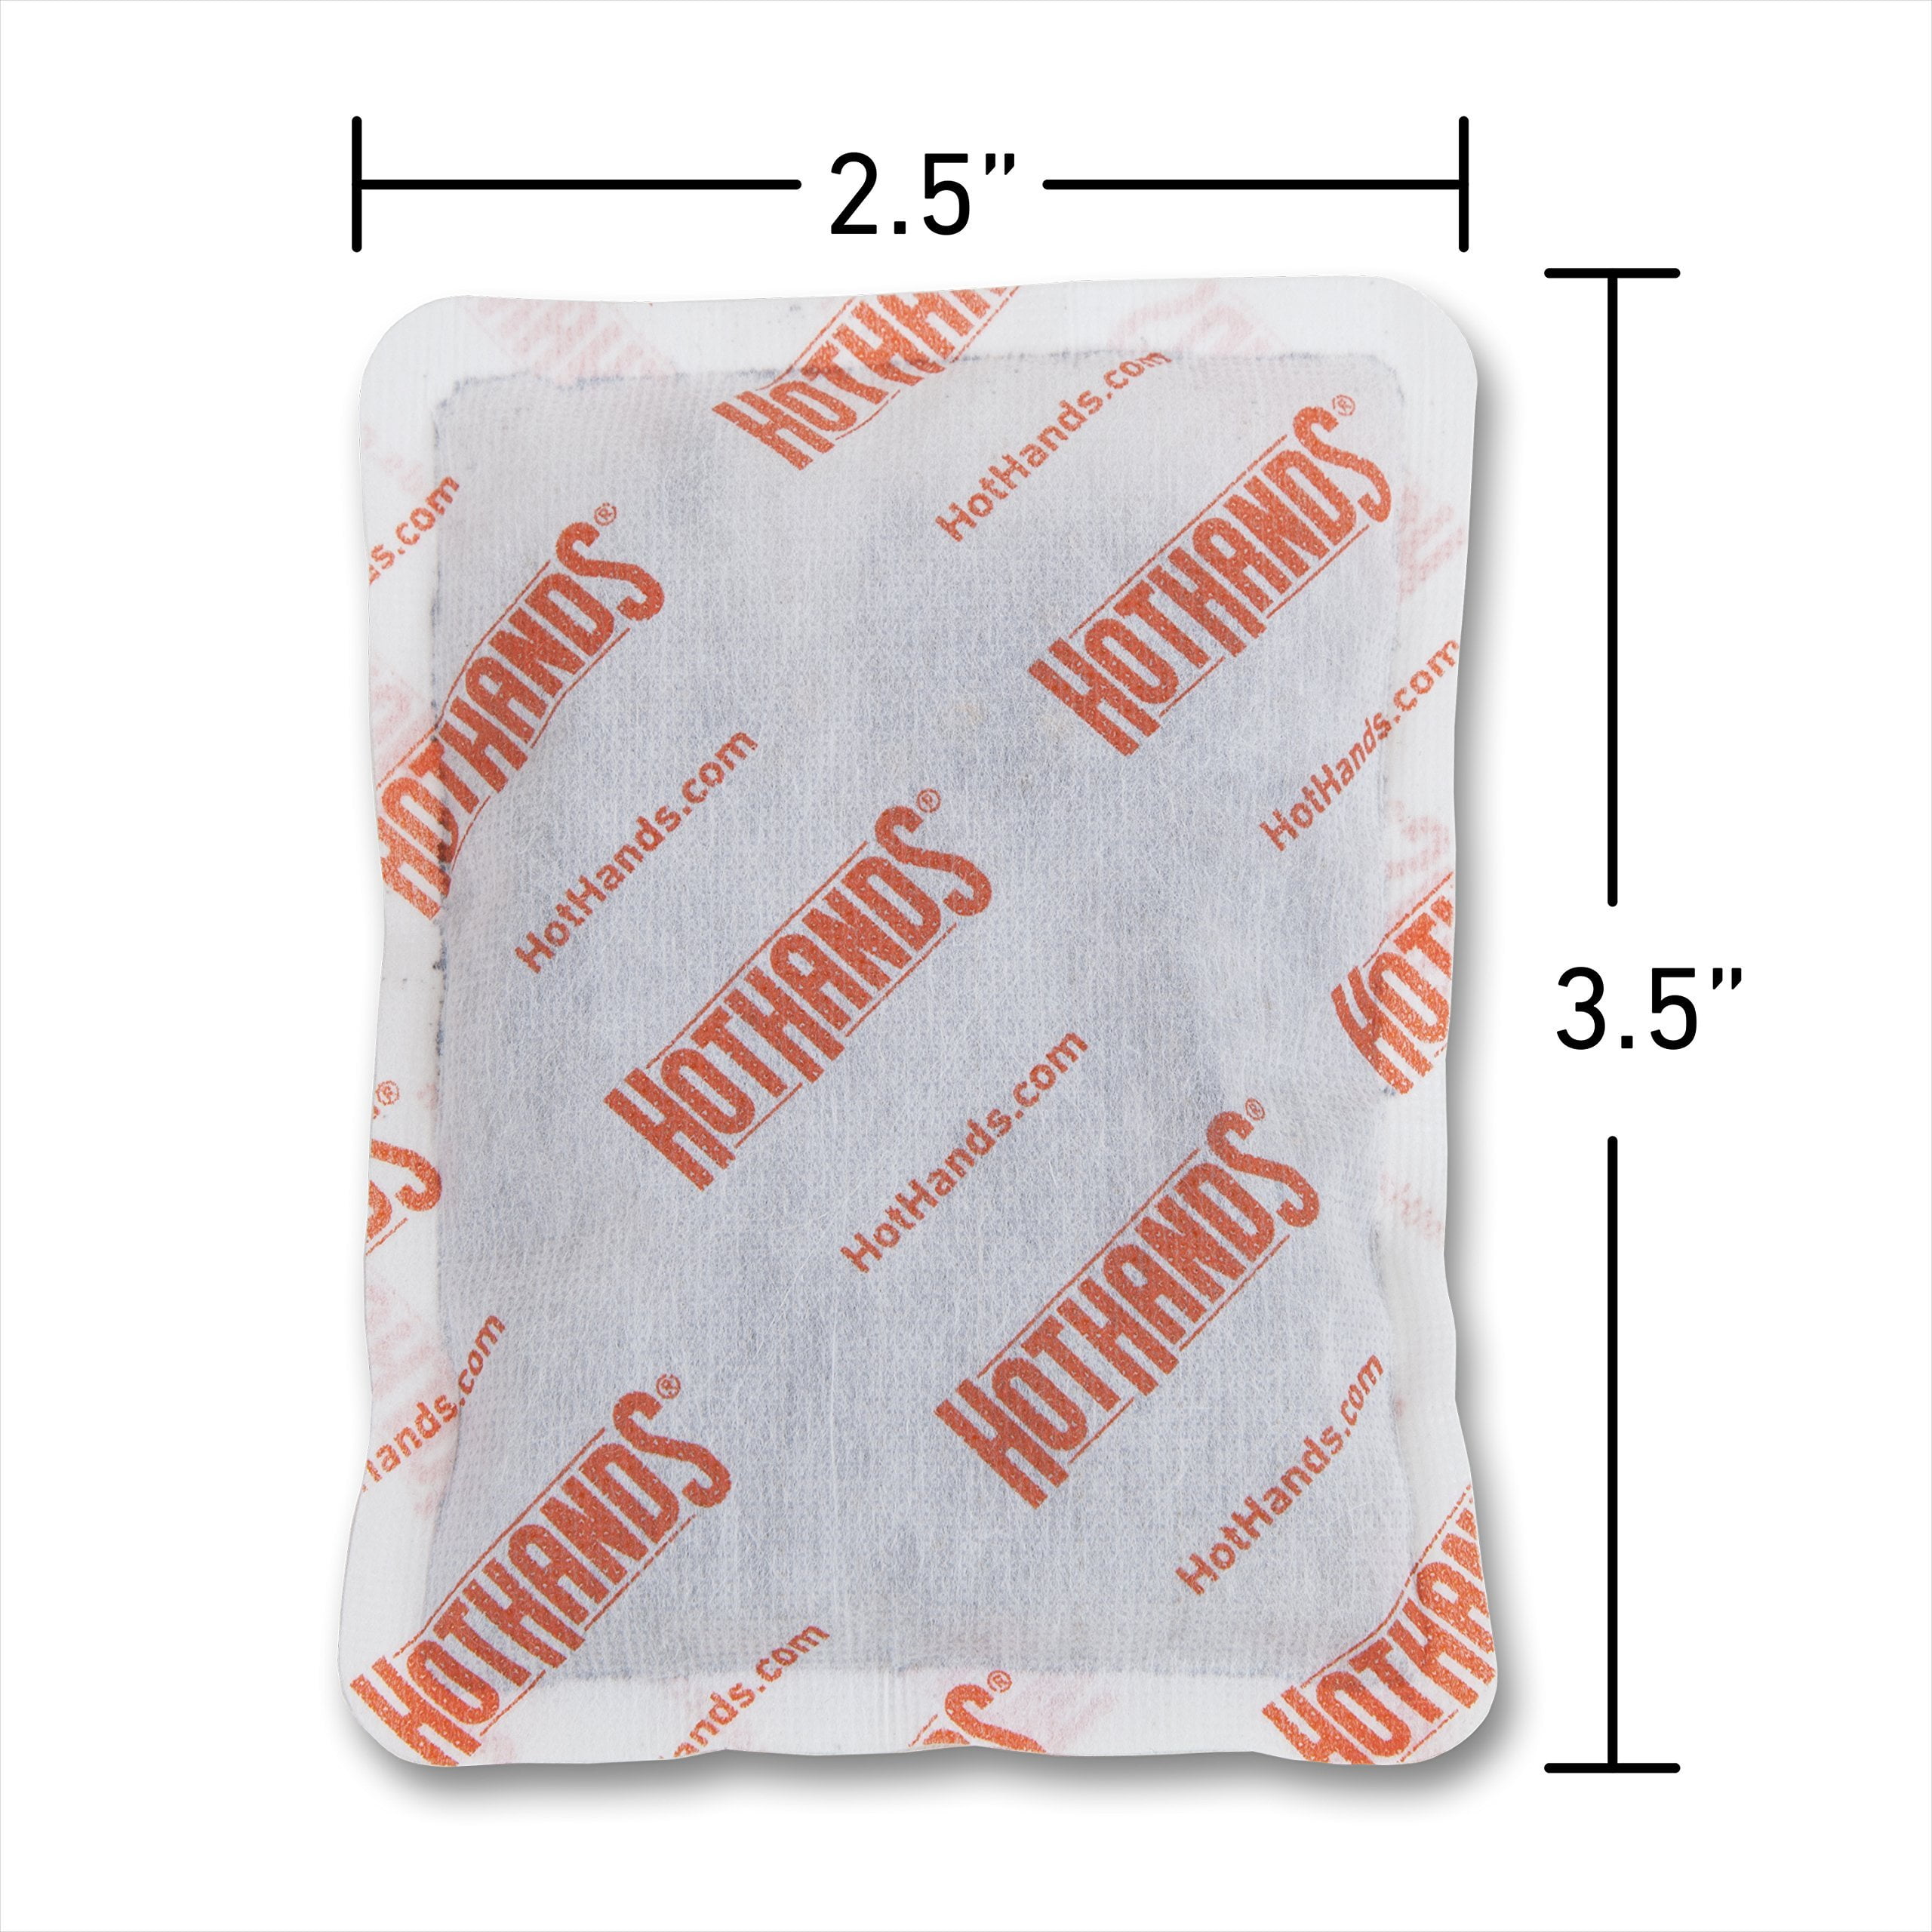 HotHands Body & Hand Super Warmers Long Lasting Safe Natural Odorless Air Acti 